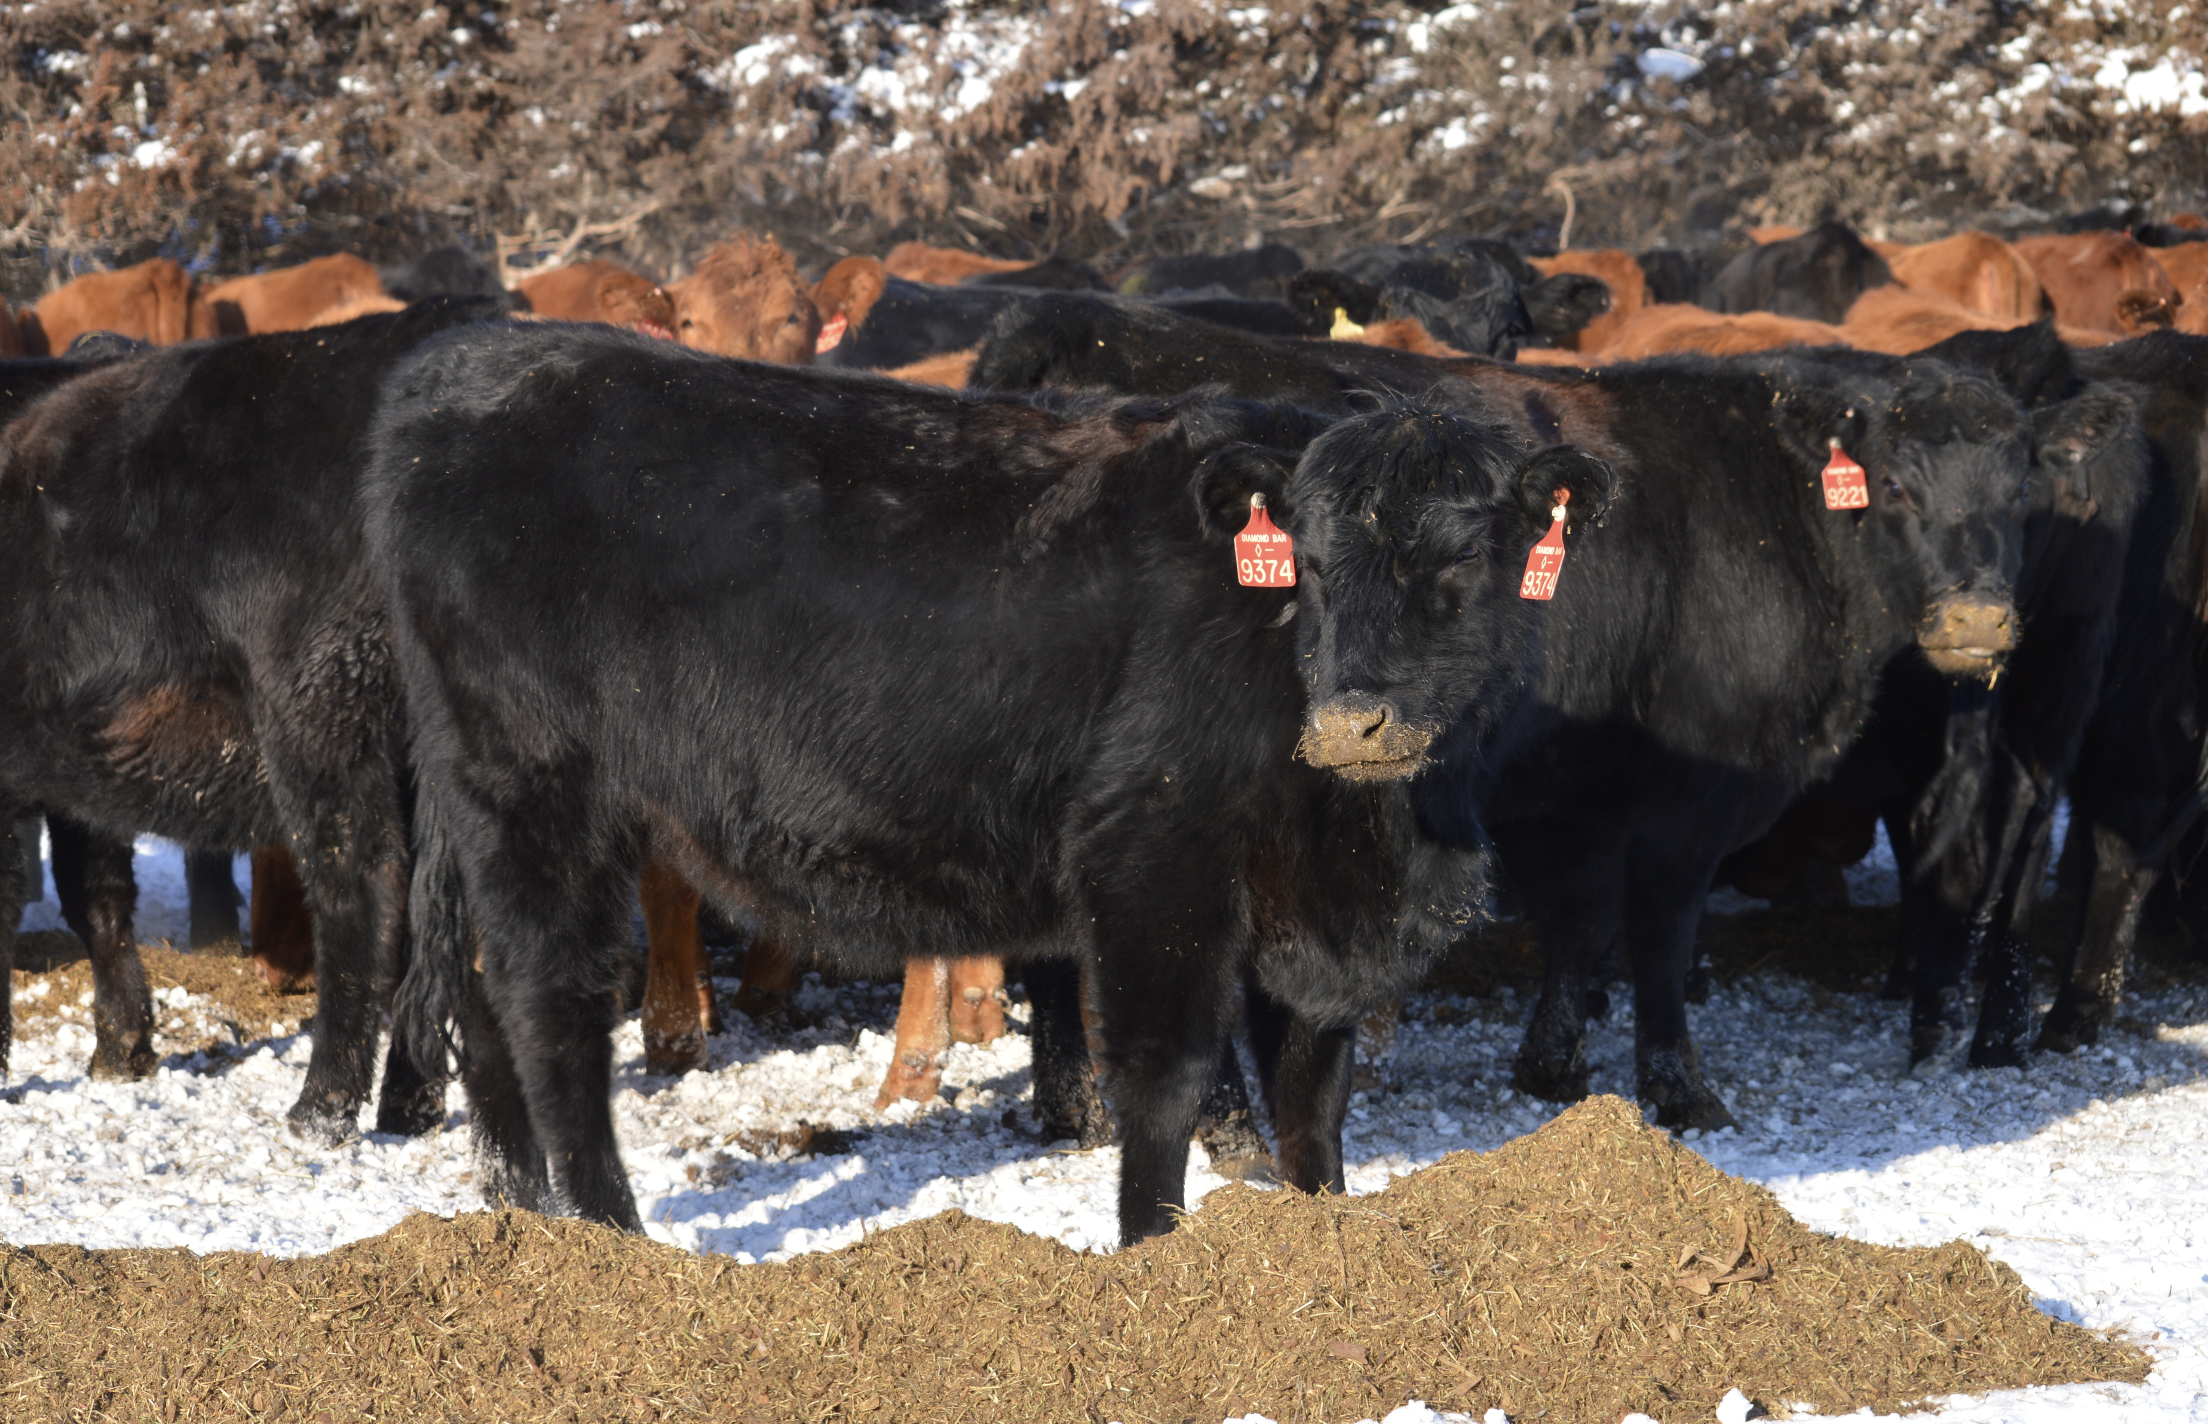 heifers eating ground feed in the snow